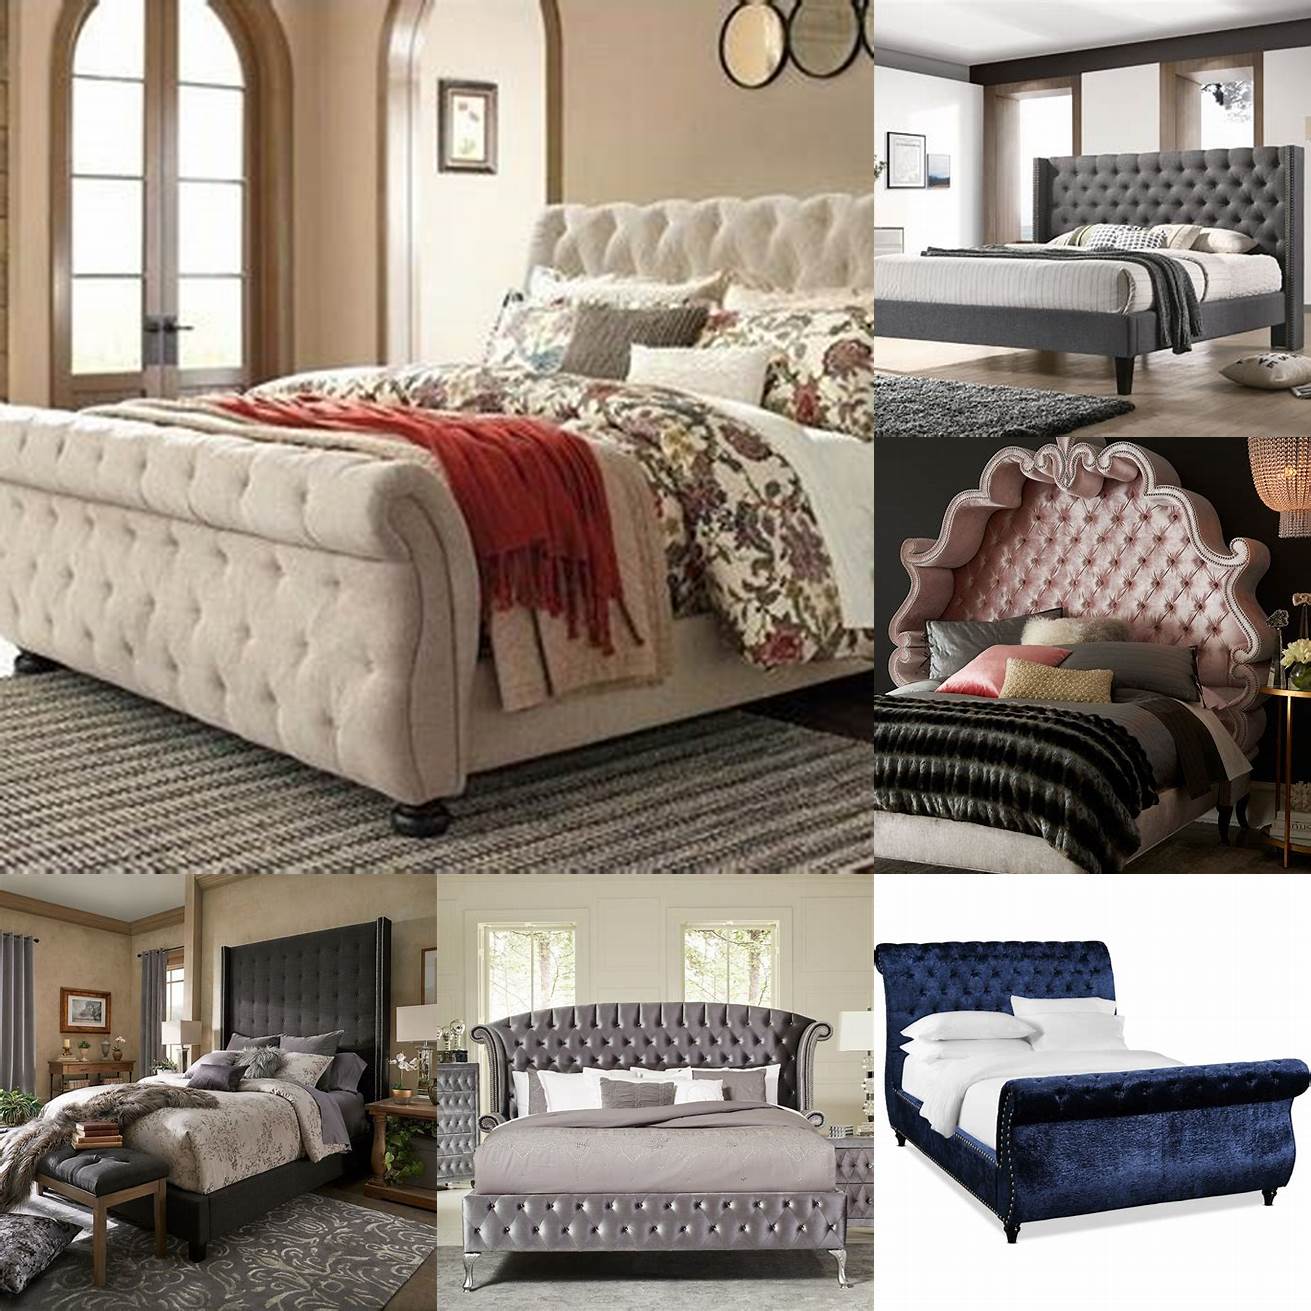 Value Tufted beds are a great investment because they add value to your home If you decide to sell your house in the future a tufted bed can increase its appeal and make it more attractive to potential buyers